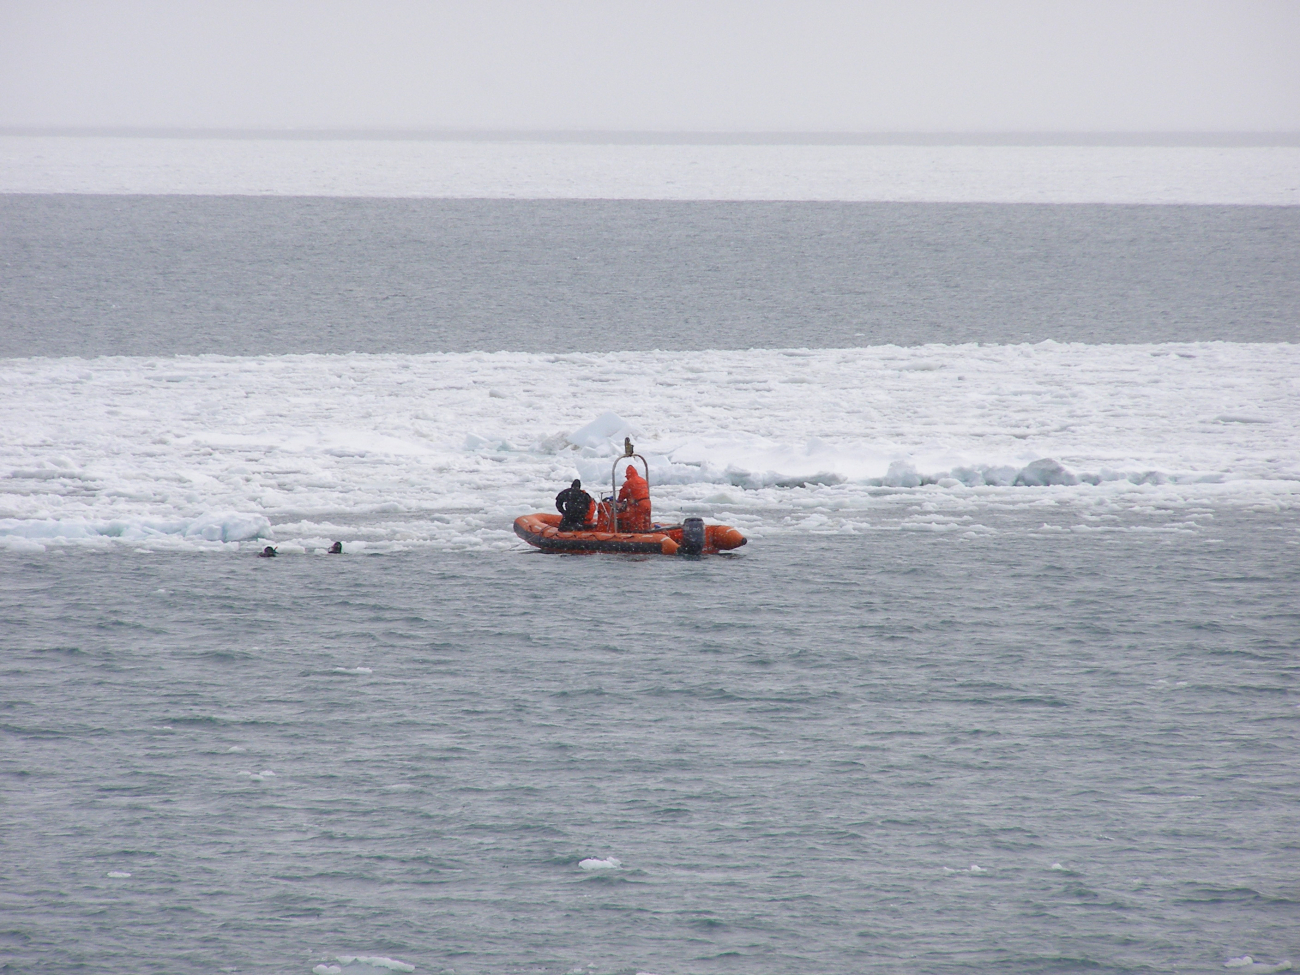 Divers from the MILLER FREEMAN being tended by small boat at edge of ice